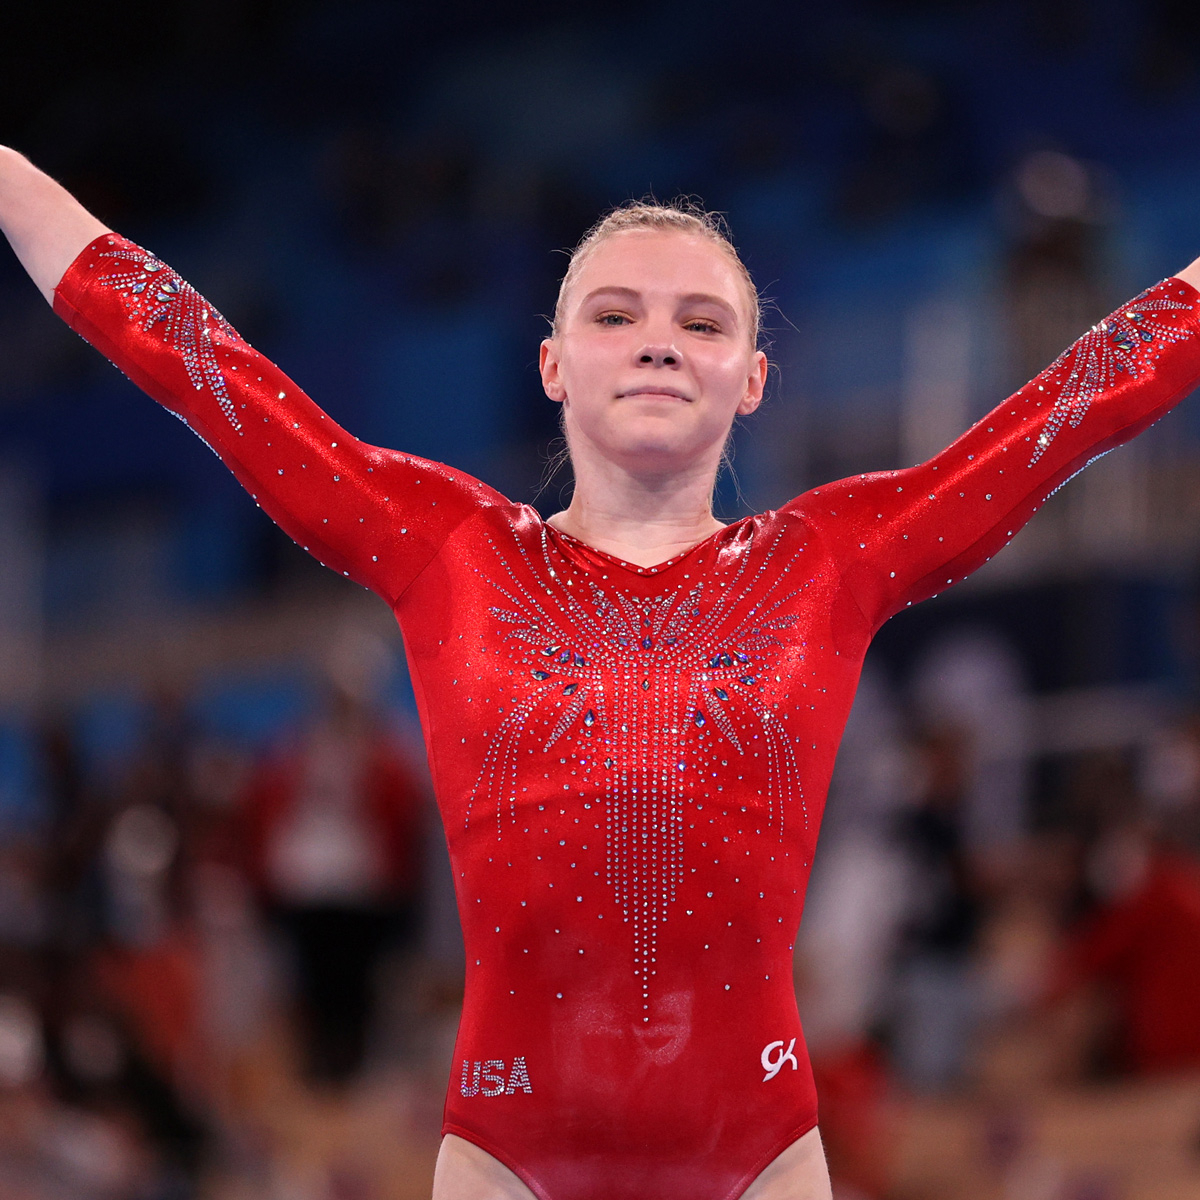 Gymnast Jade Carey Shares Why She Fell During Floor Routine